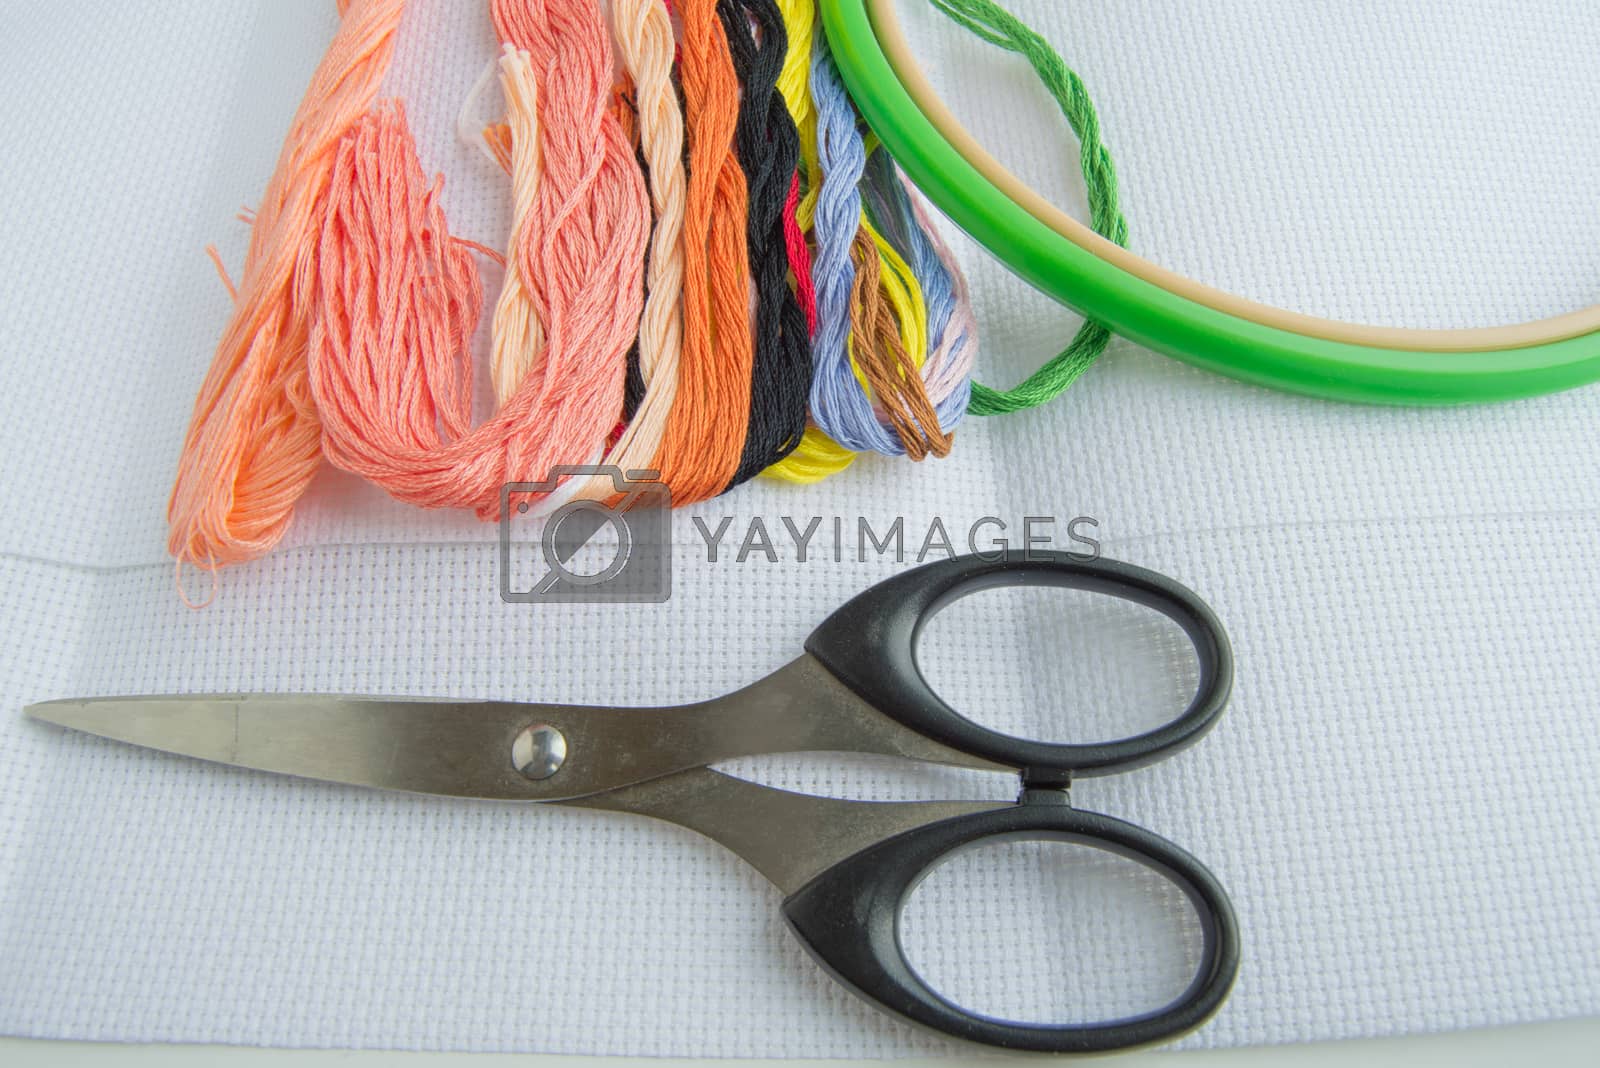 Royalty free image of Scissors and bright colorful thread for embroidery thread on canvas. Handmade accessories on white background. Place for text, top view by claire_lucia